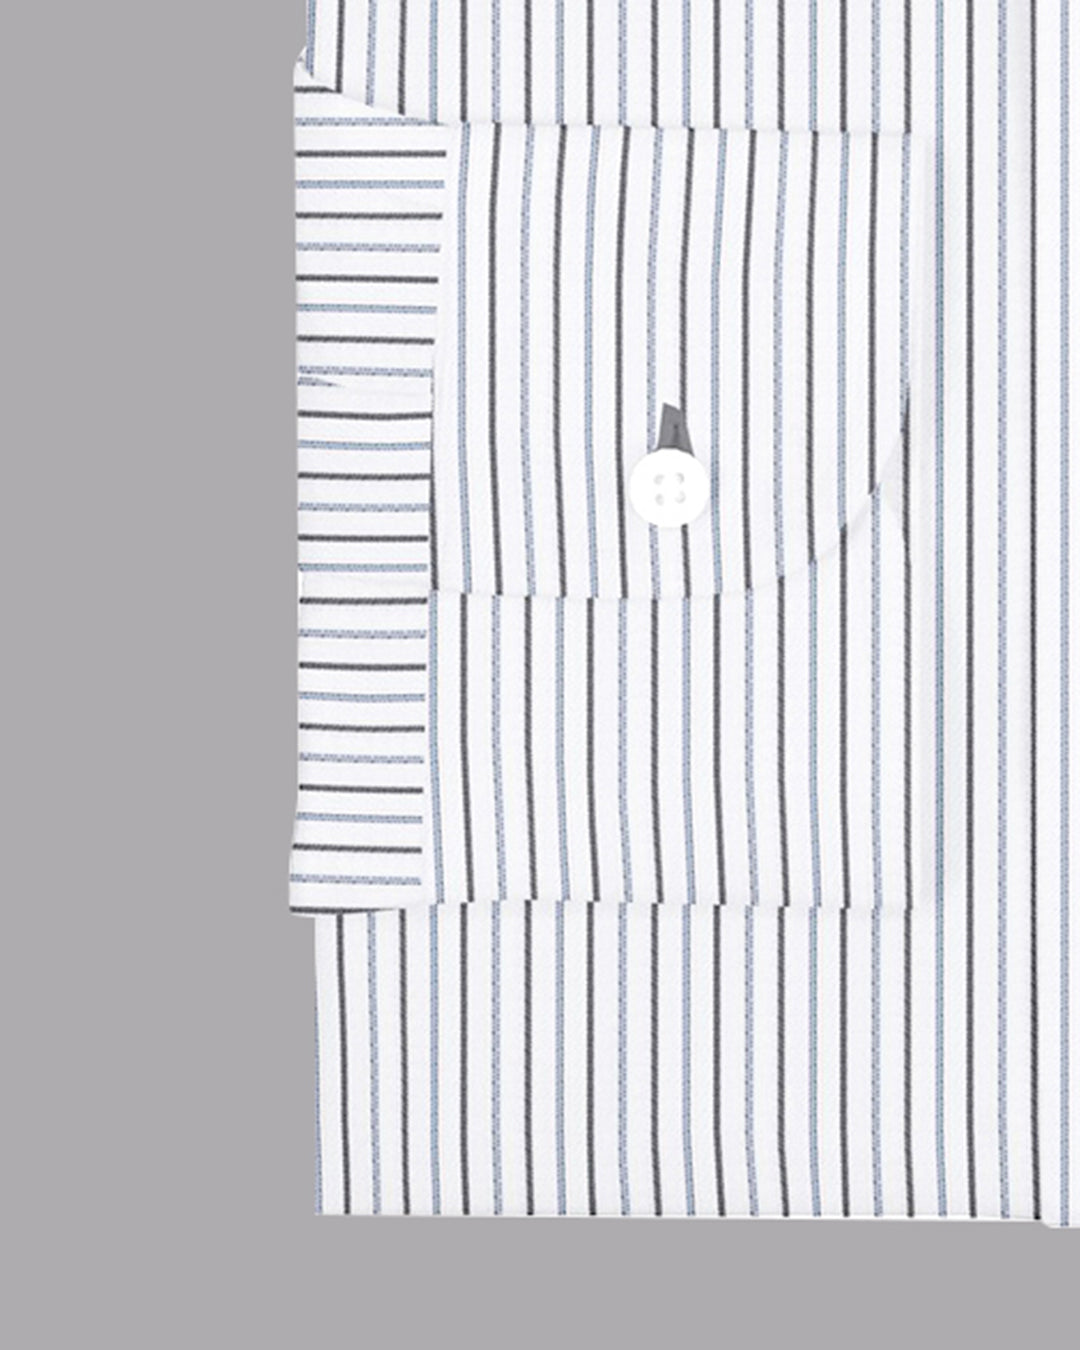 Cuff of the custom linen shirt for men in white with black and blue stripes by Luxire Clothi